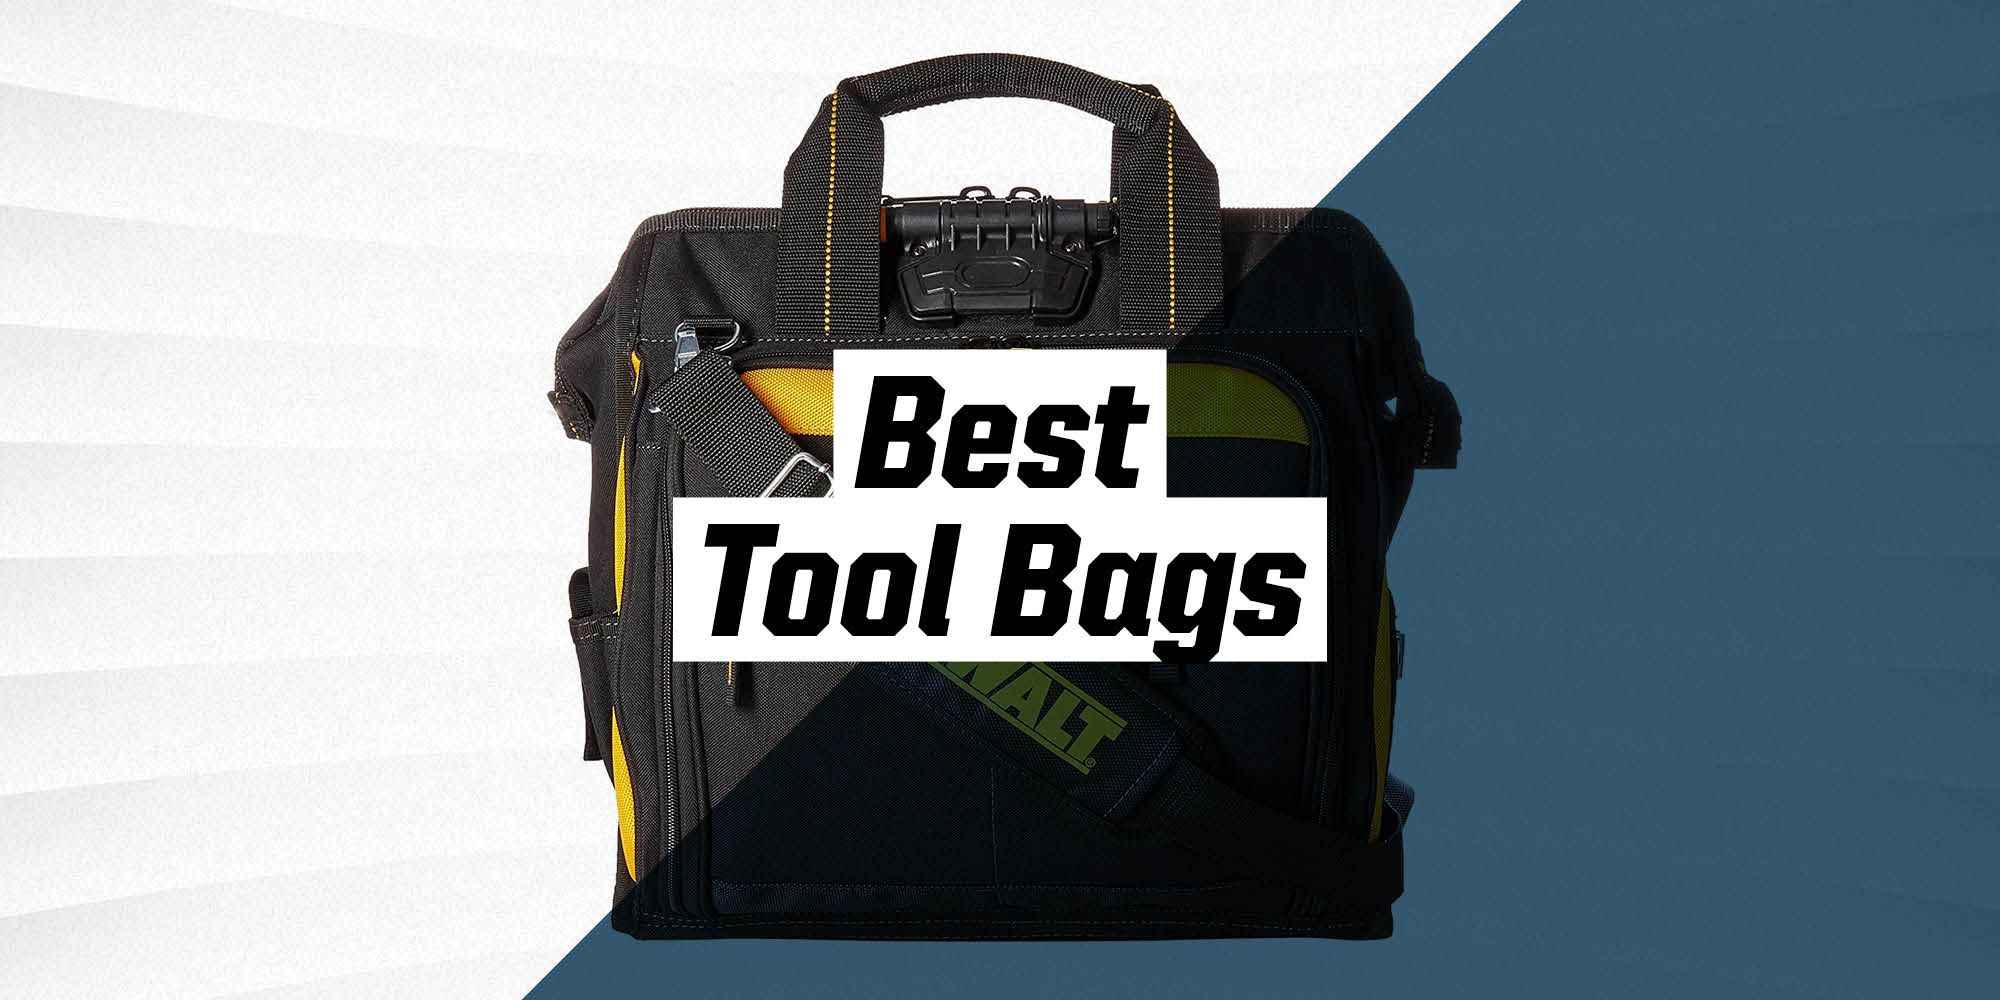 Black Roll 20 Pocket Tool Bag For Organizing and Storing of Wrenches and Tool